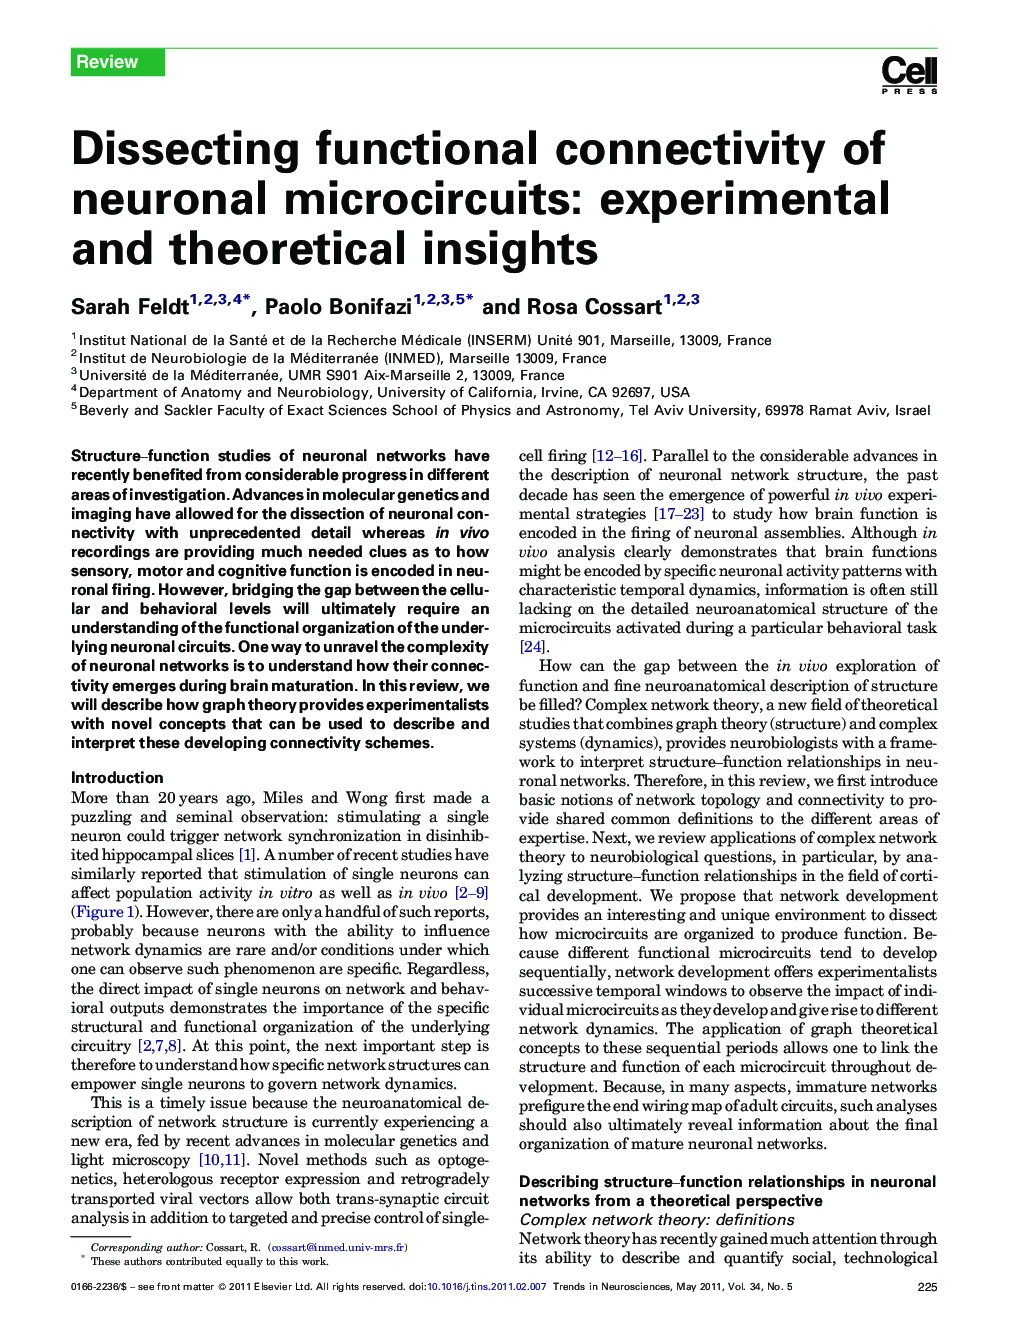 Dissecting functional connectivity of neuronal microcircuits: experimental and theoretical insights